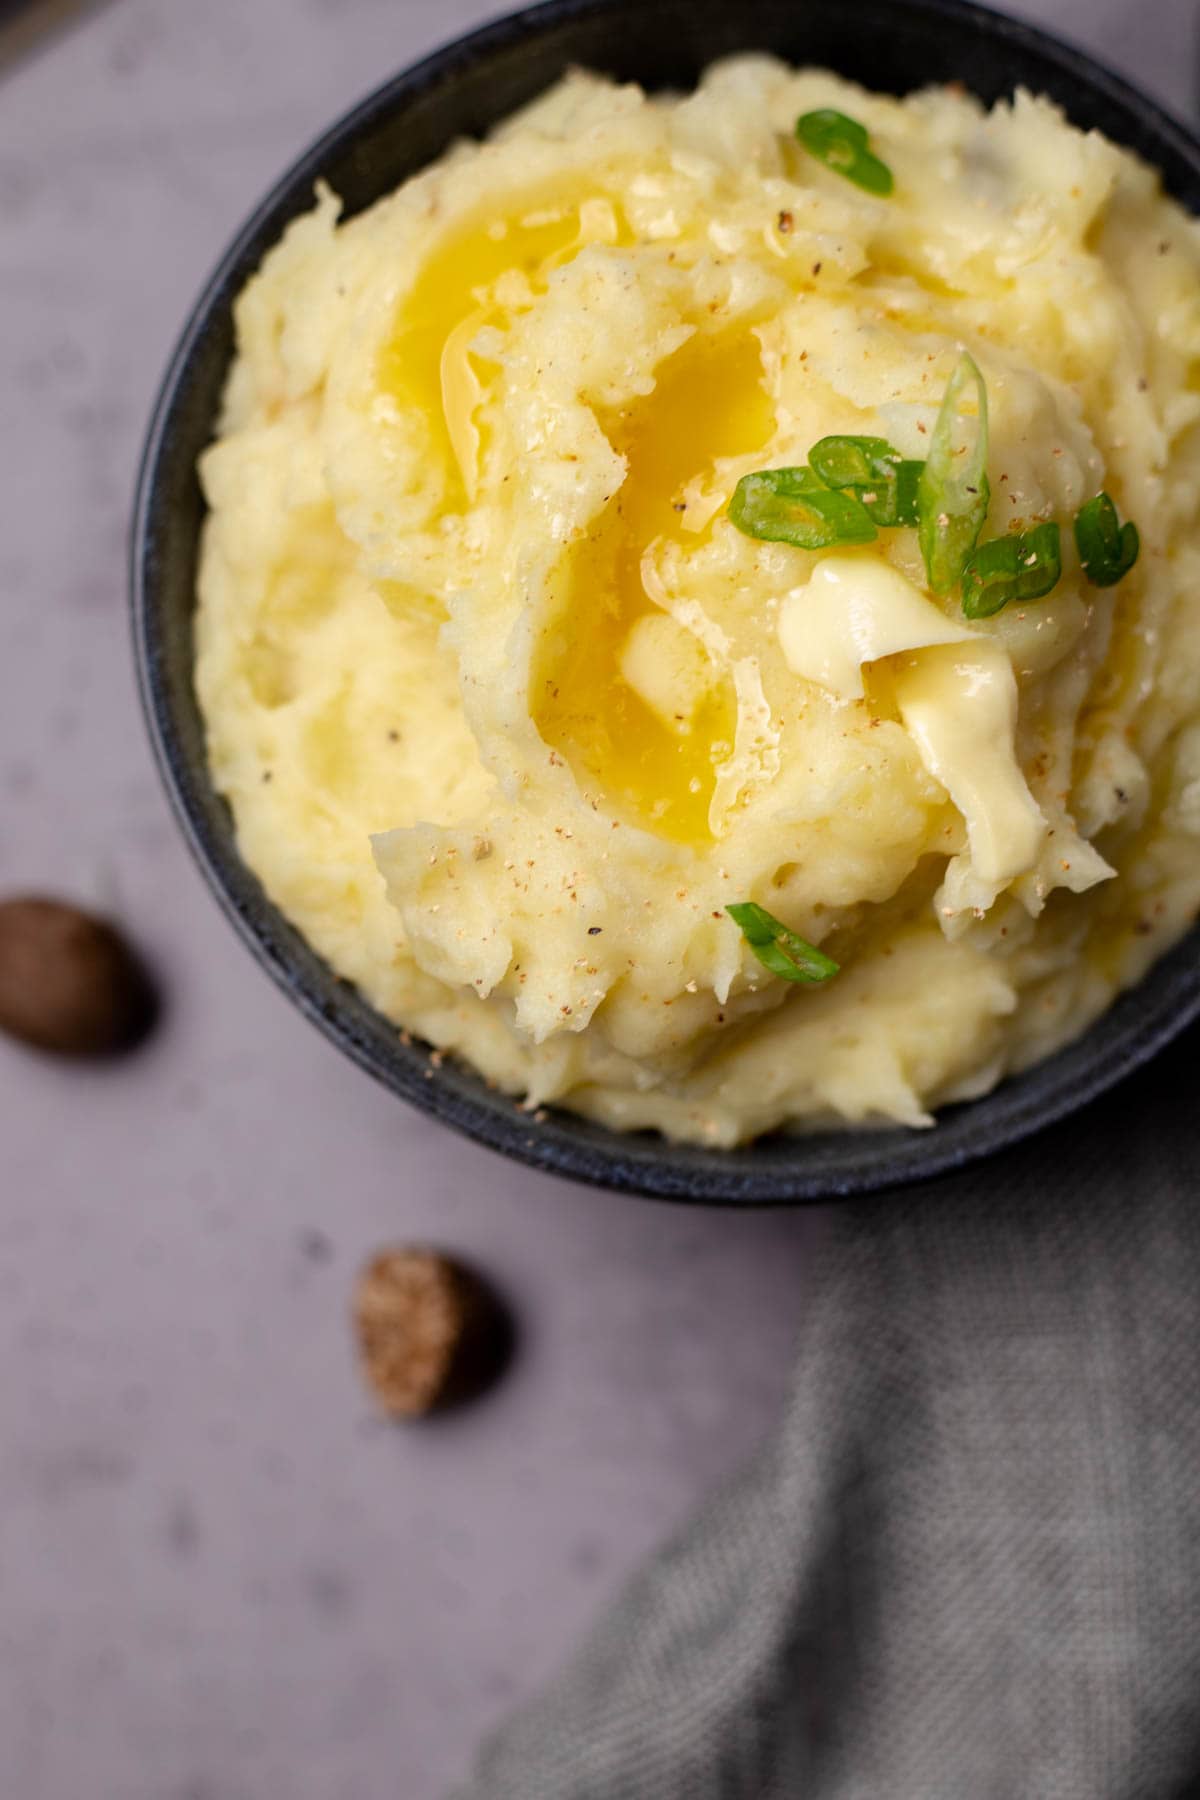 Mashed potatoes in a bowl garnished with ground nutmeg, butter and 2 nutmegs on the side of the bowl.